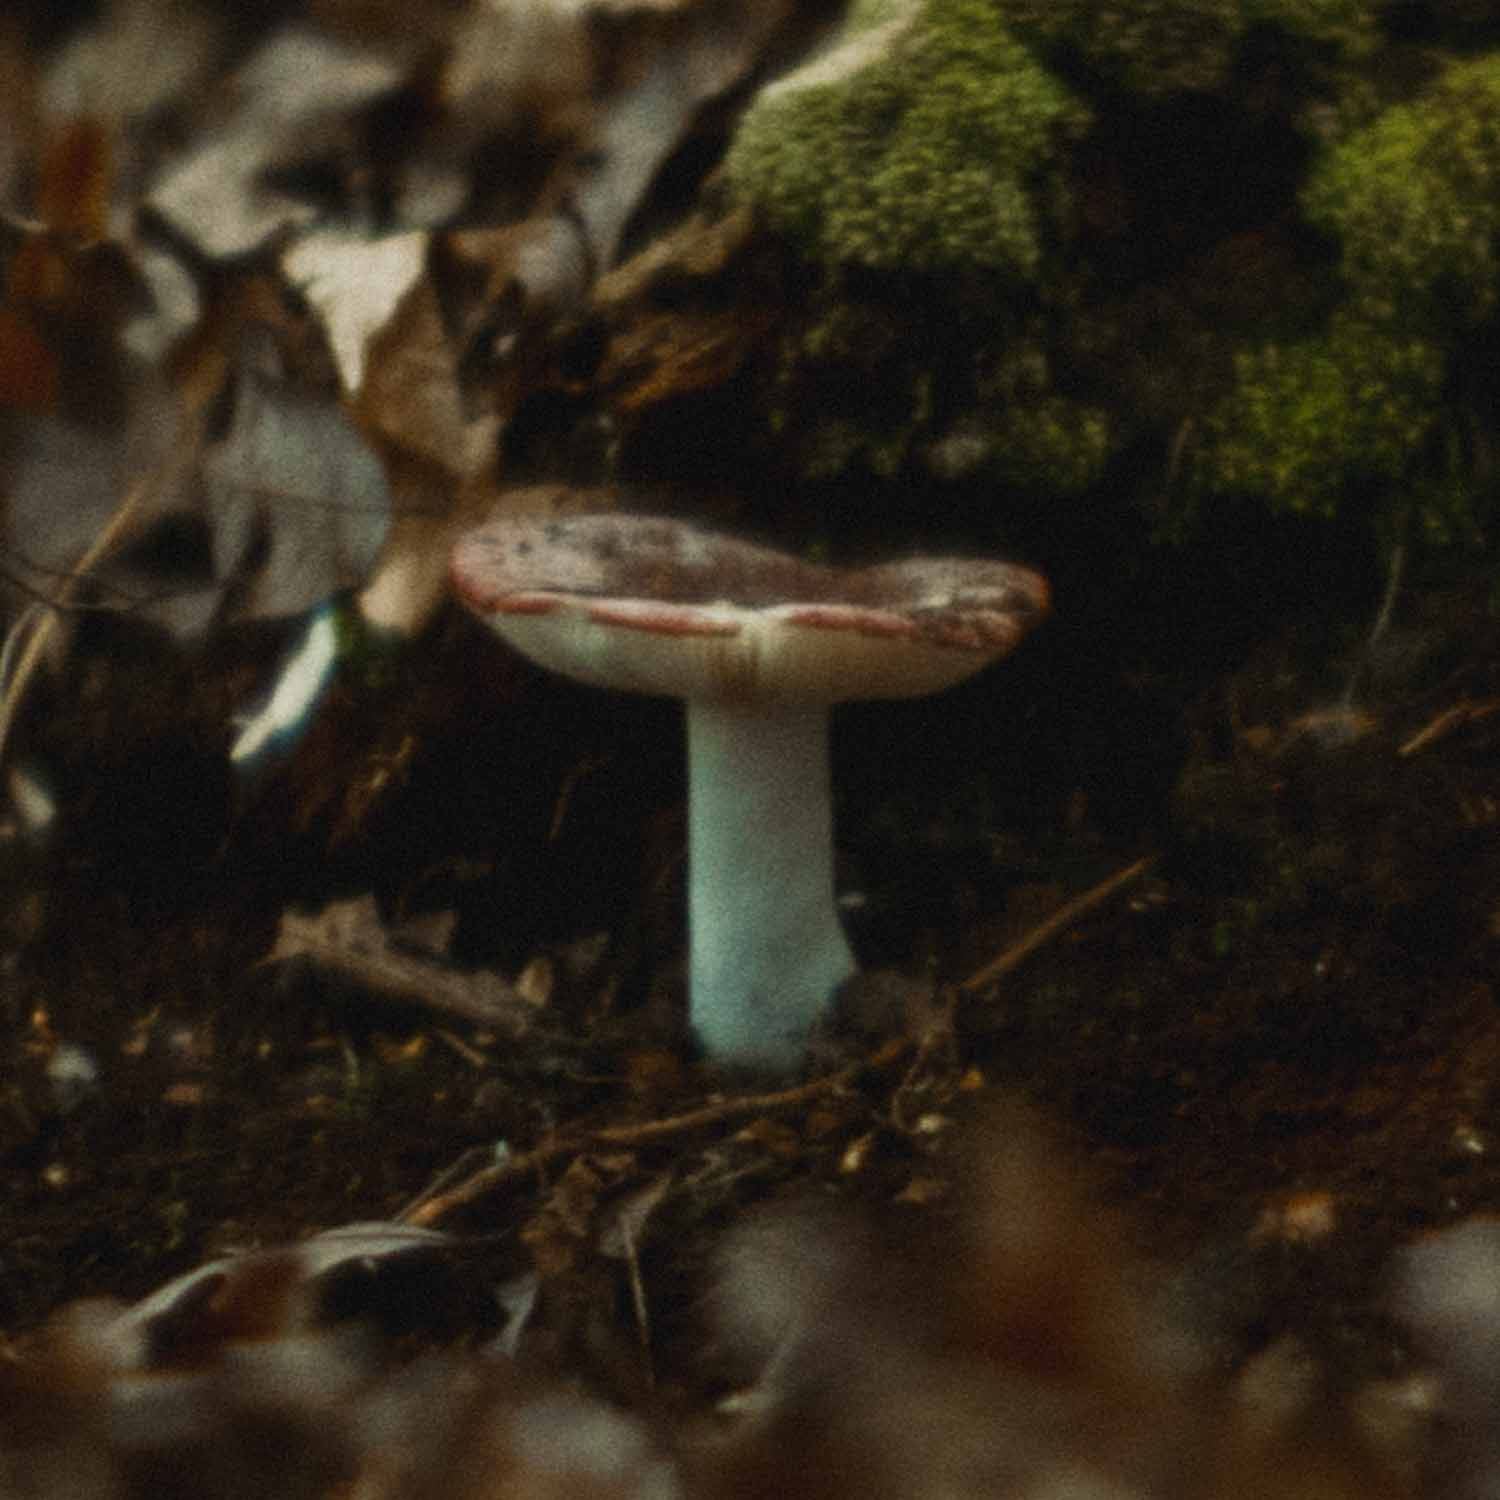 A mushroom growing on the forest floor